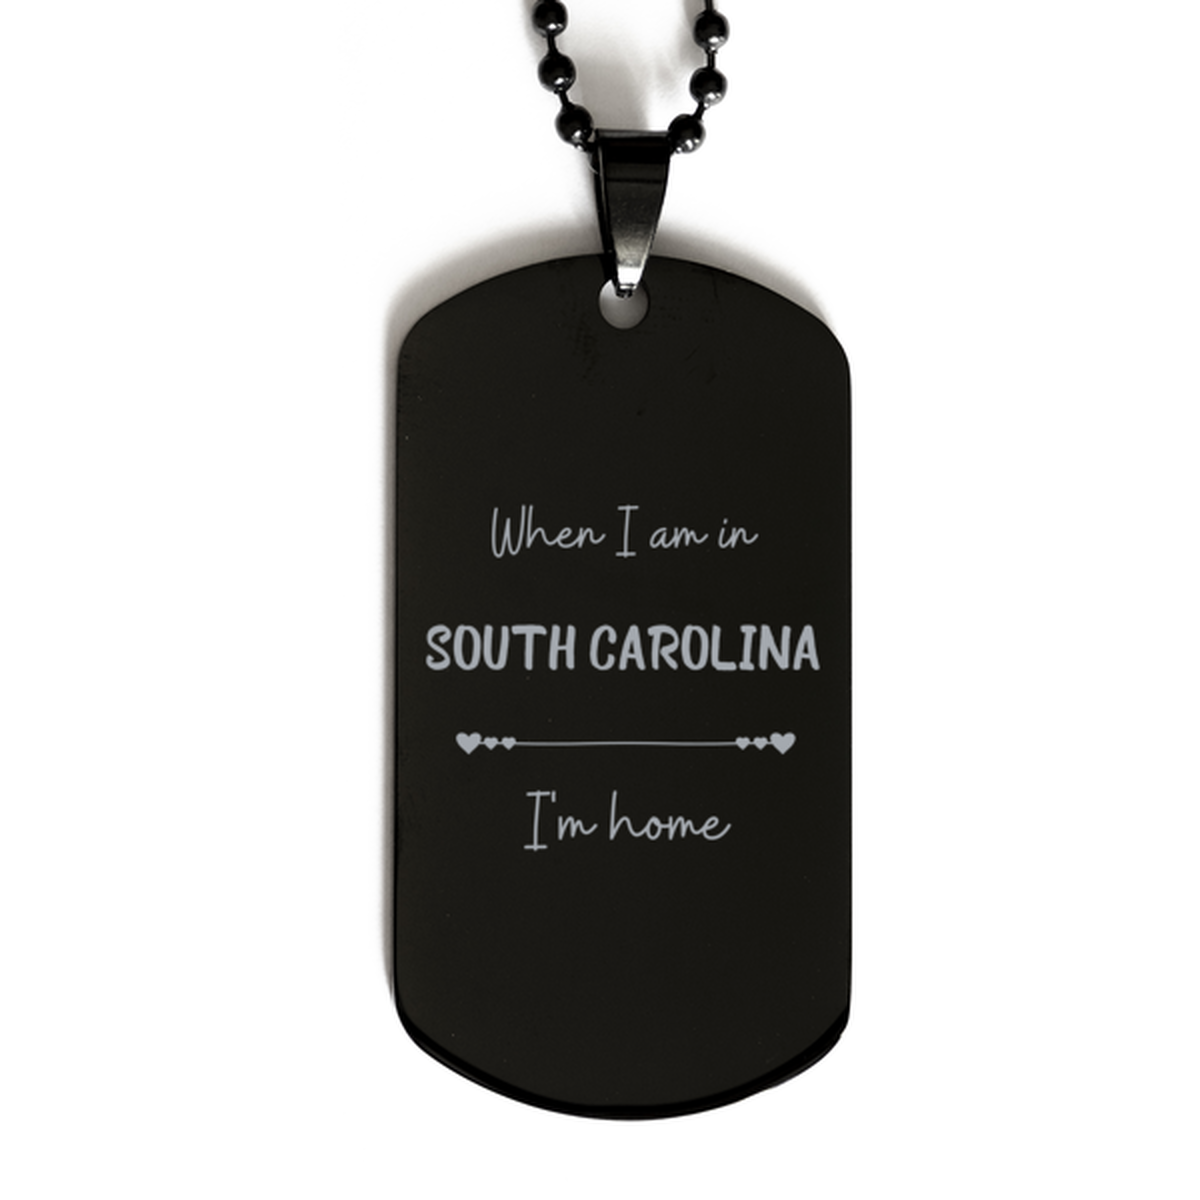 When I am in South Carolina I'm home Black Dog Tag, Cheap Gifts For South Carolina, State South Carolina Birthday Gifts for Friends Coworker